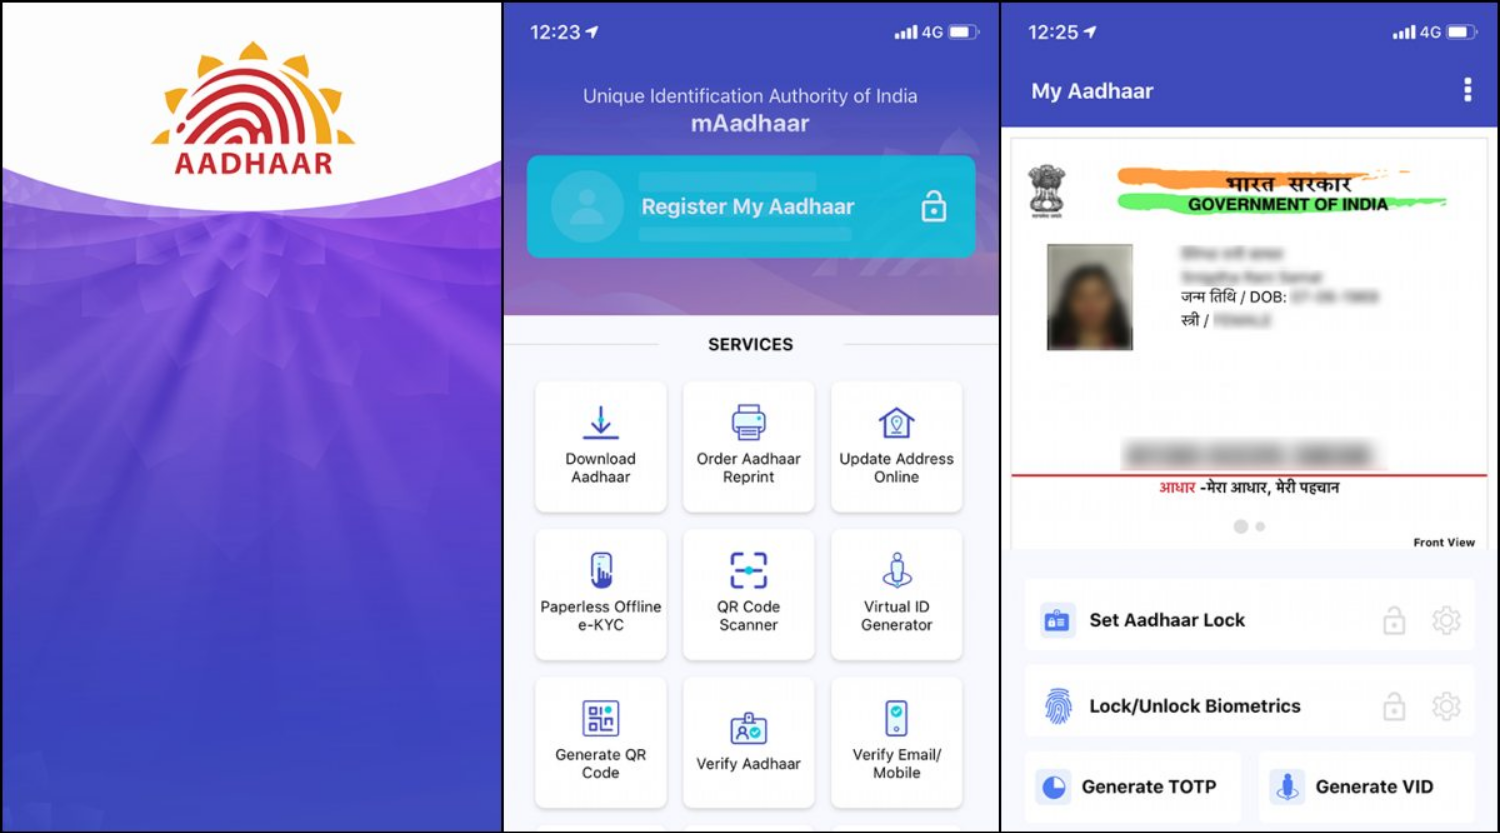 UIDAI’s mAadhaar app: What it is, how to use and other details